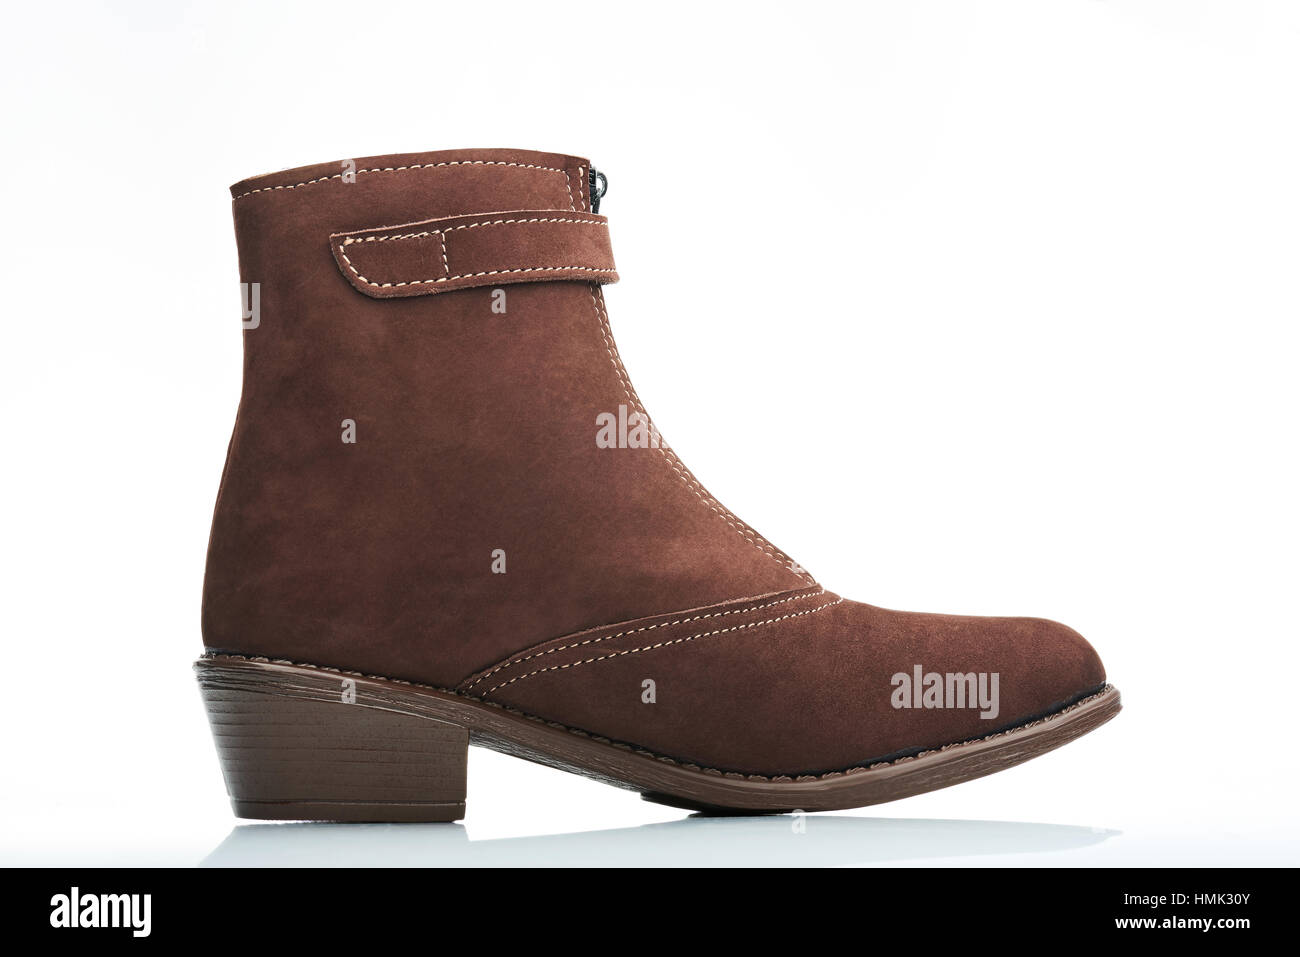 side view catalog style brown leather women boot Stock Photo